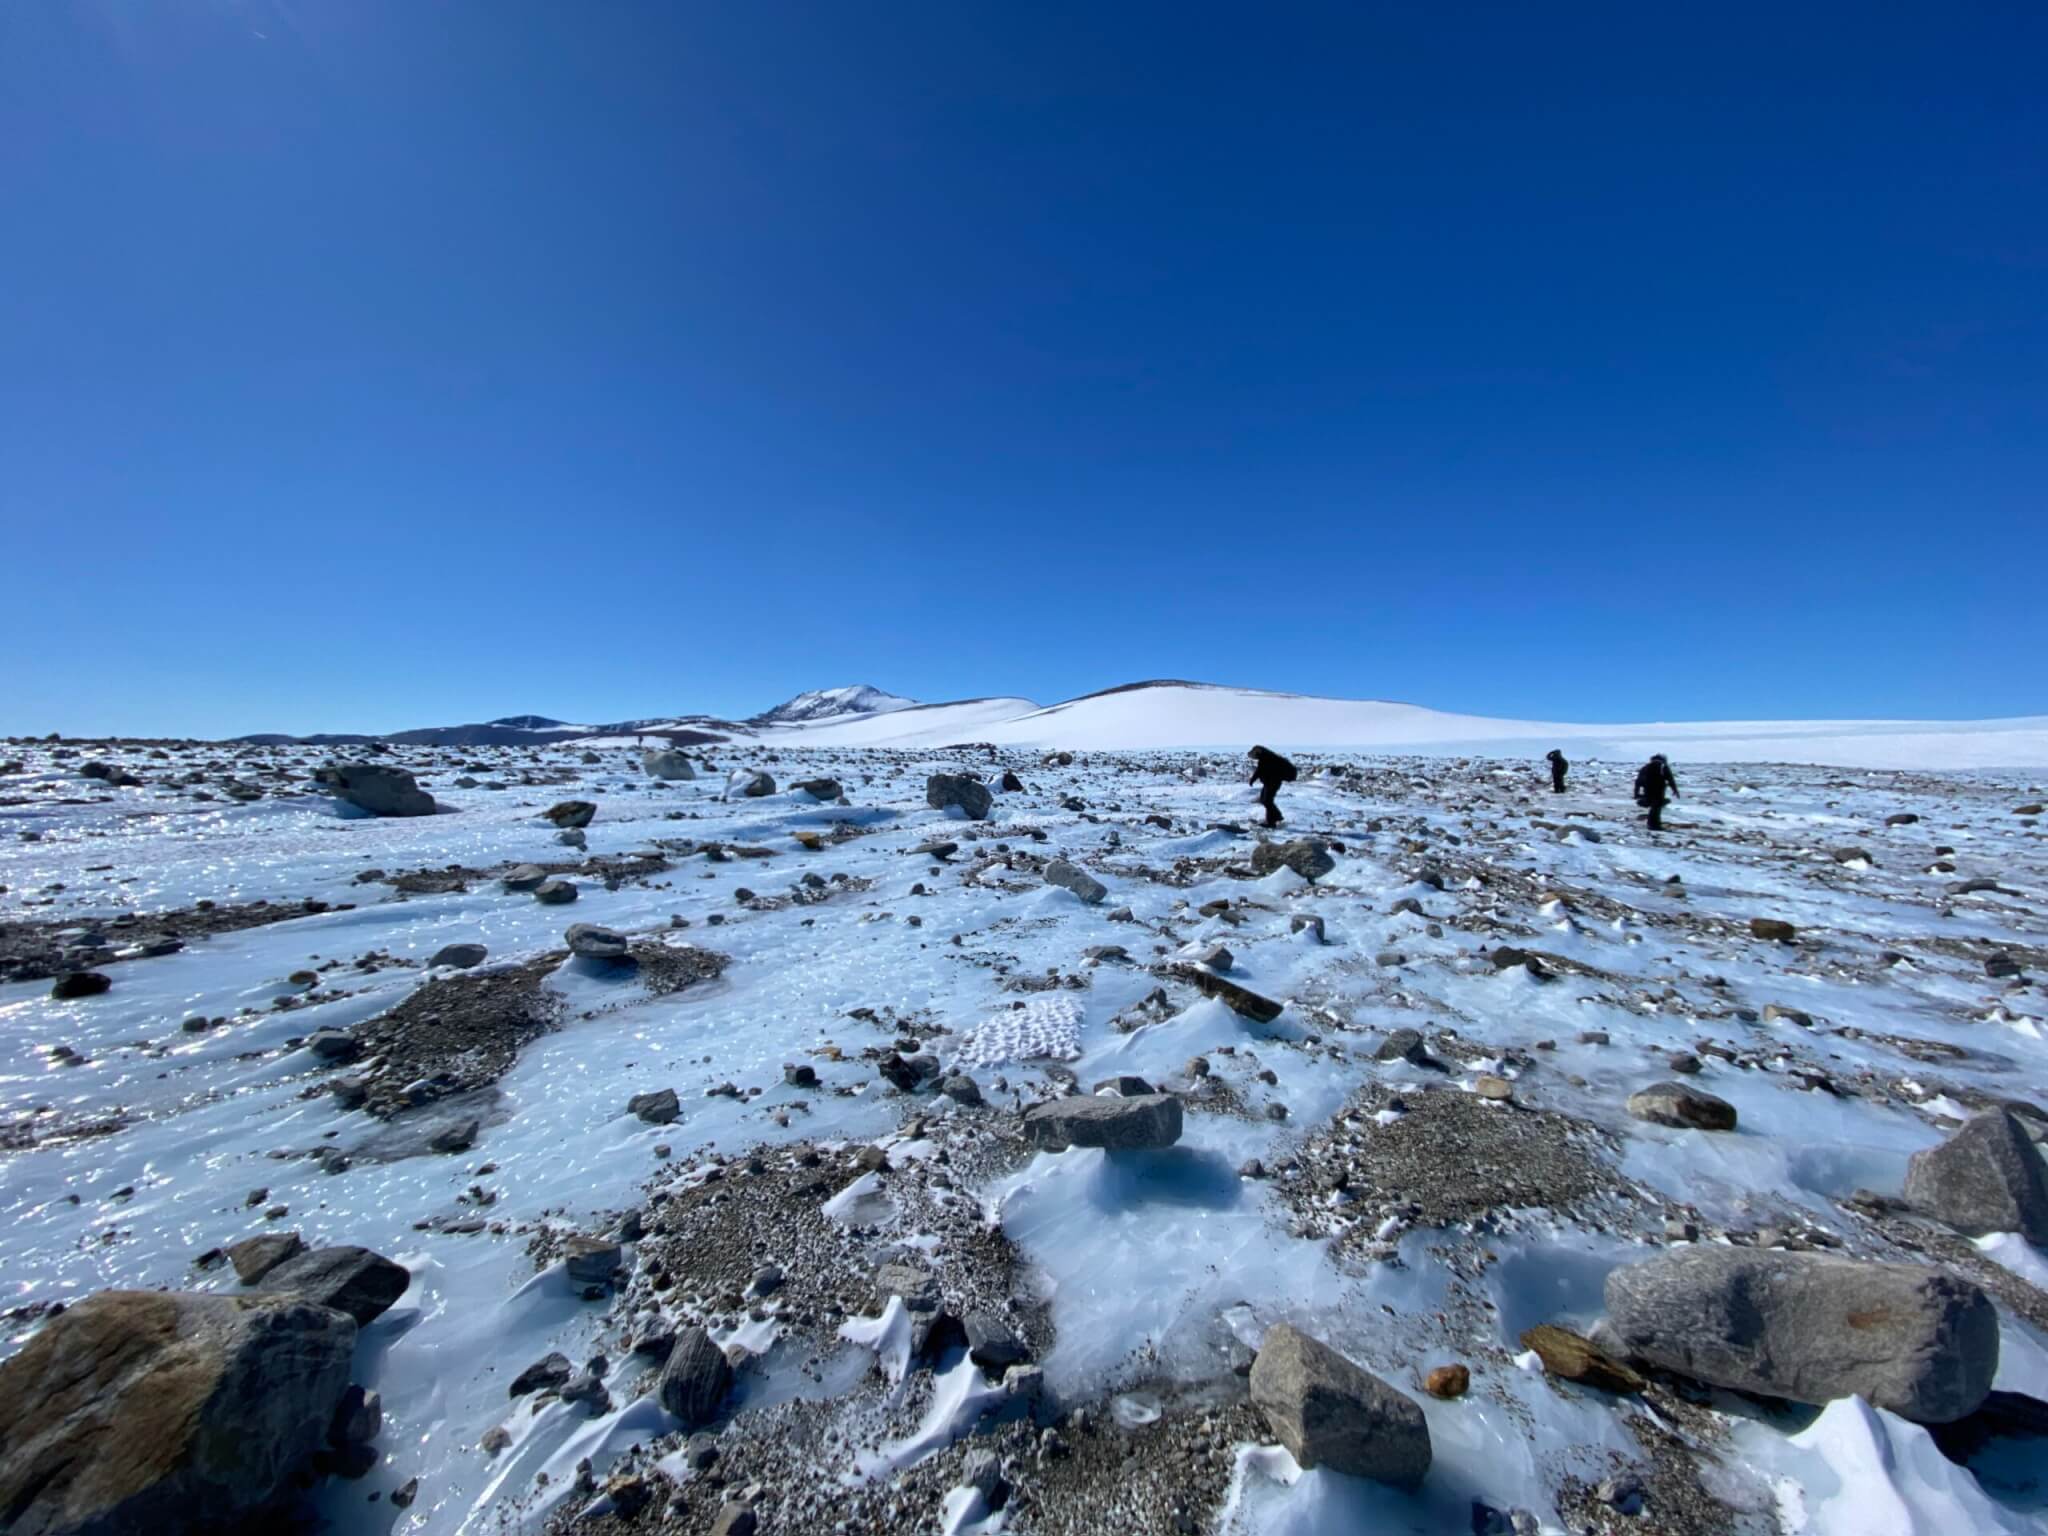 Rocks strewn across an ice field, with the scientists searching for meteorites in the background.